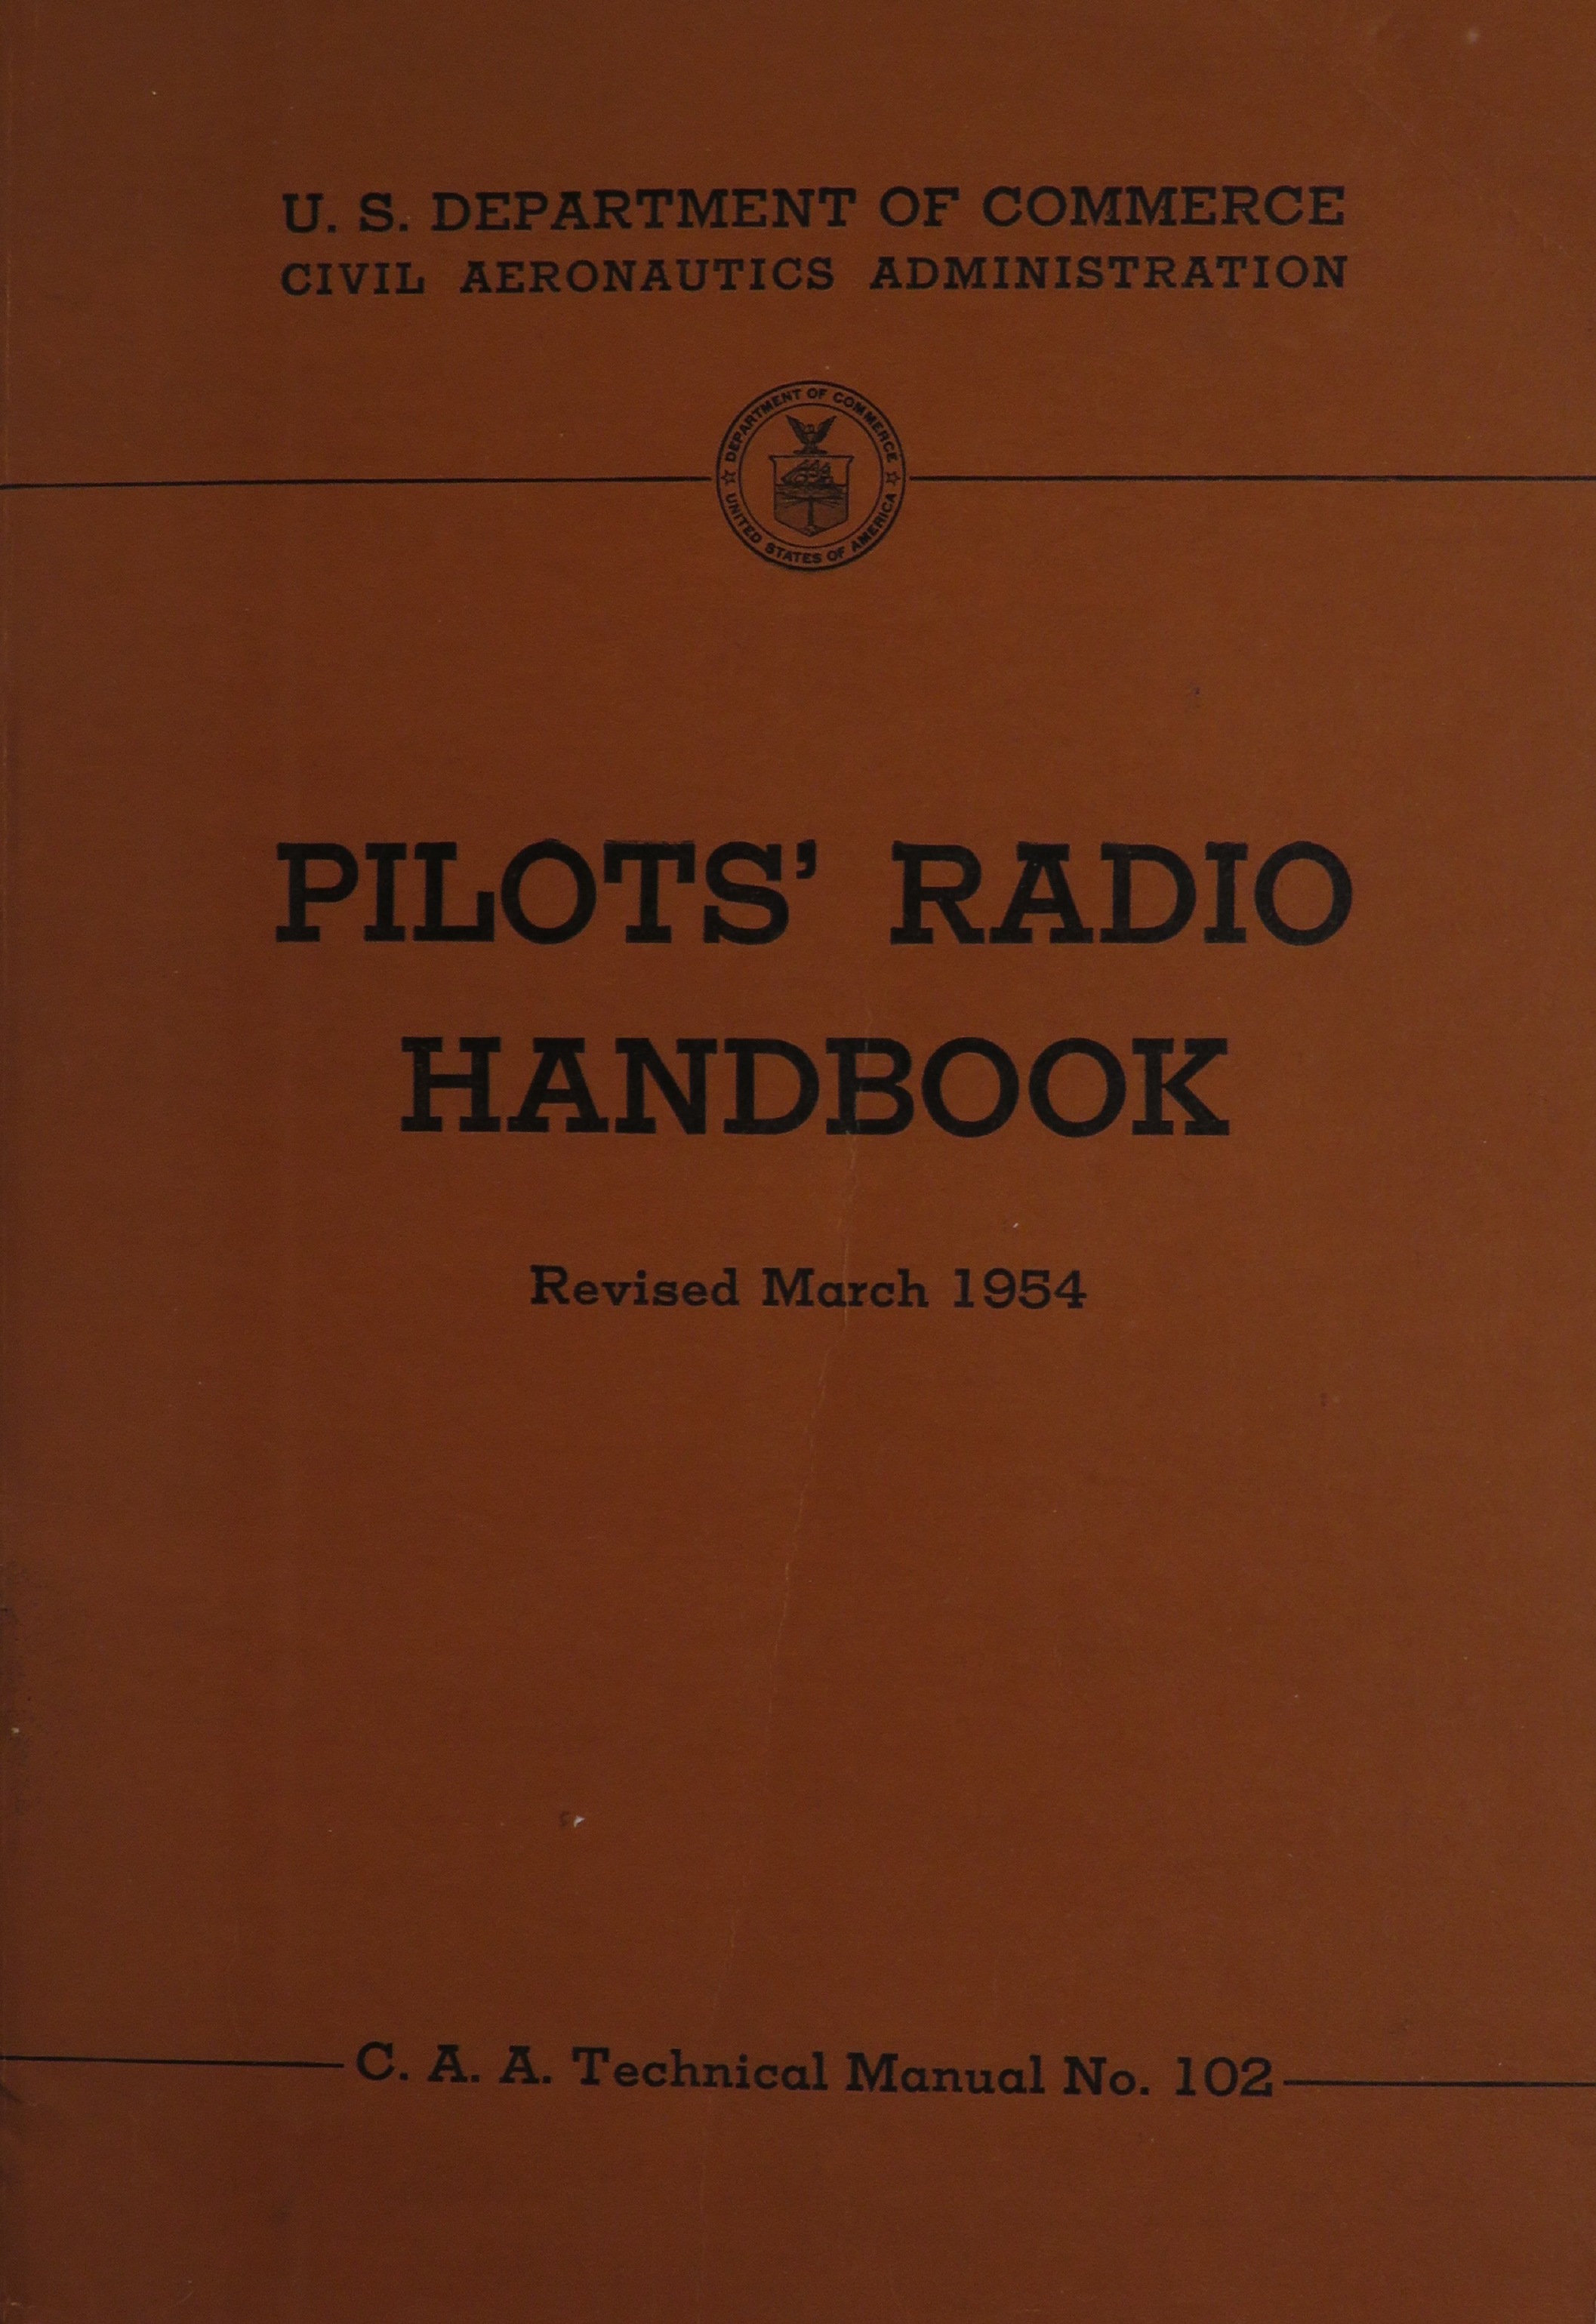 Sample page 1 from AirCorps Library document: Pilot's Radio Handbook